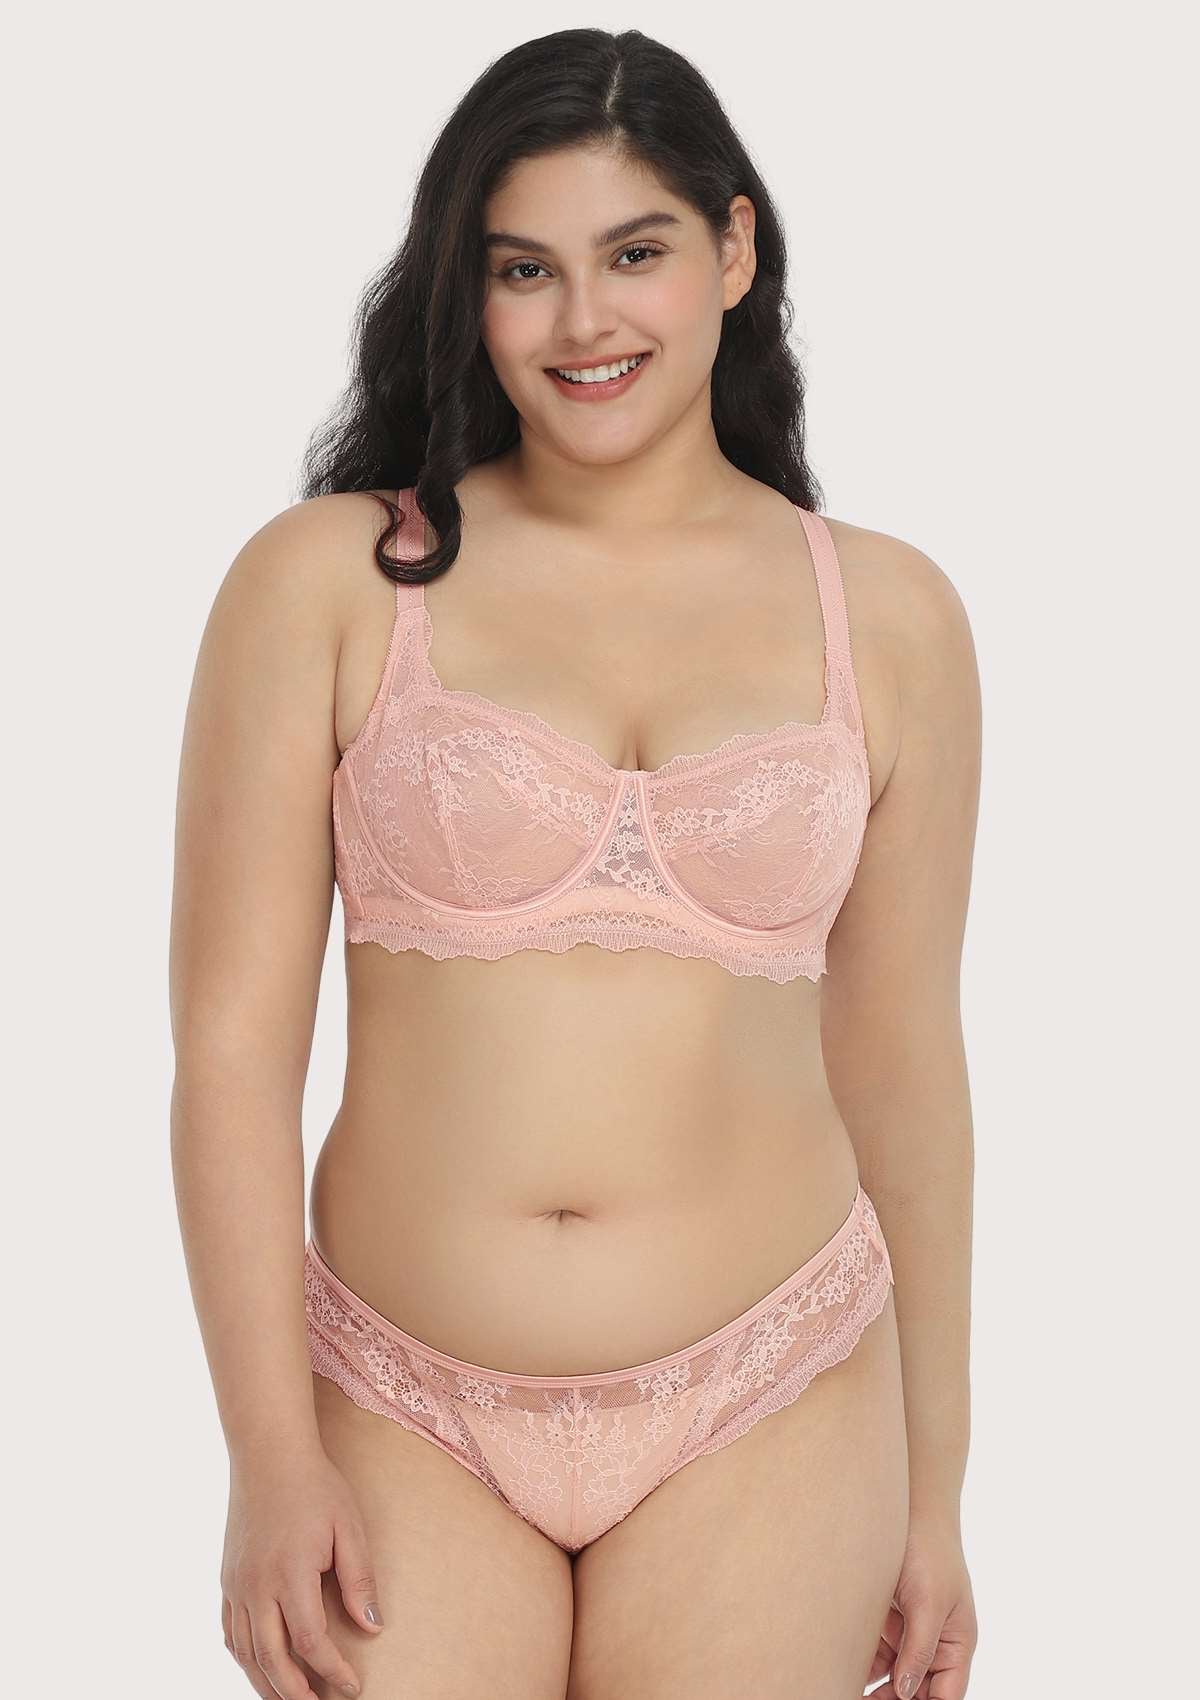 BREEZIES 40C Pink ULTIMAIR A52299 Underwire 40 C Lace Unlined Bra